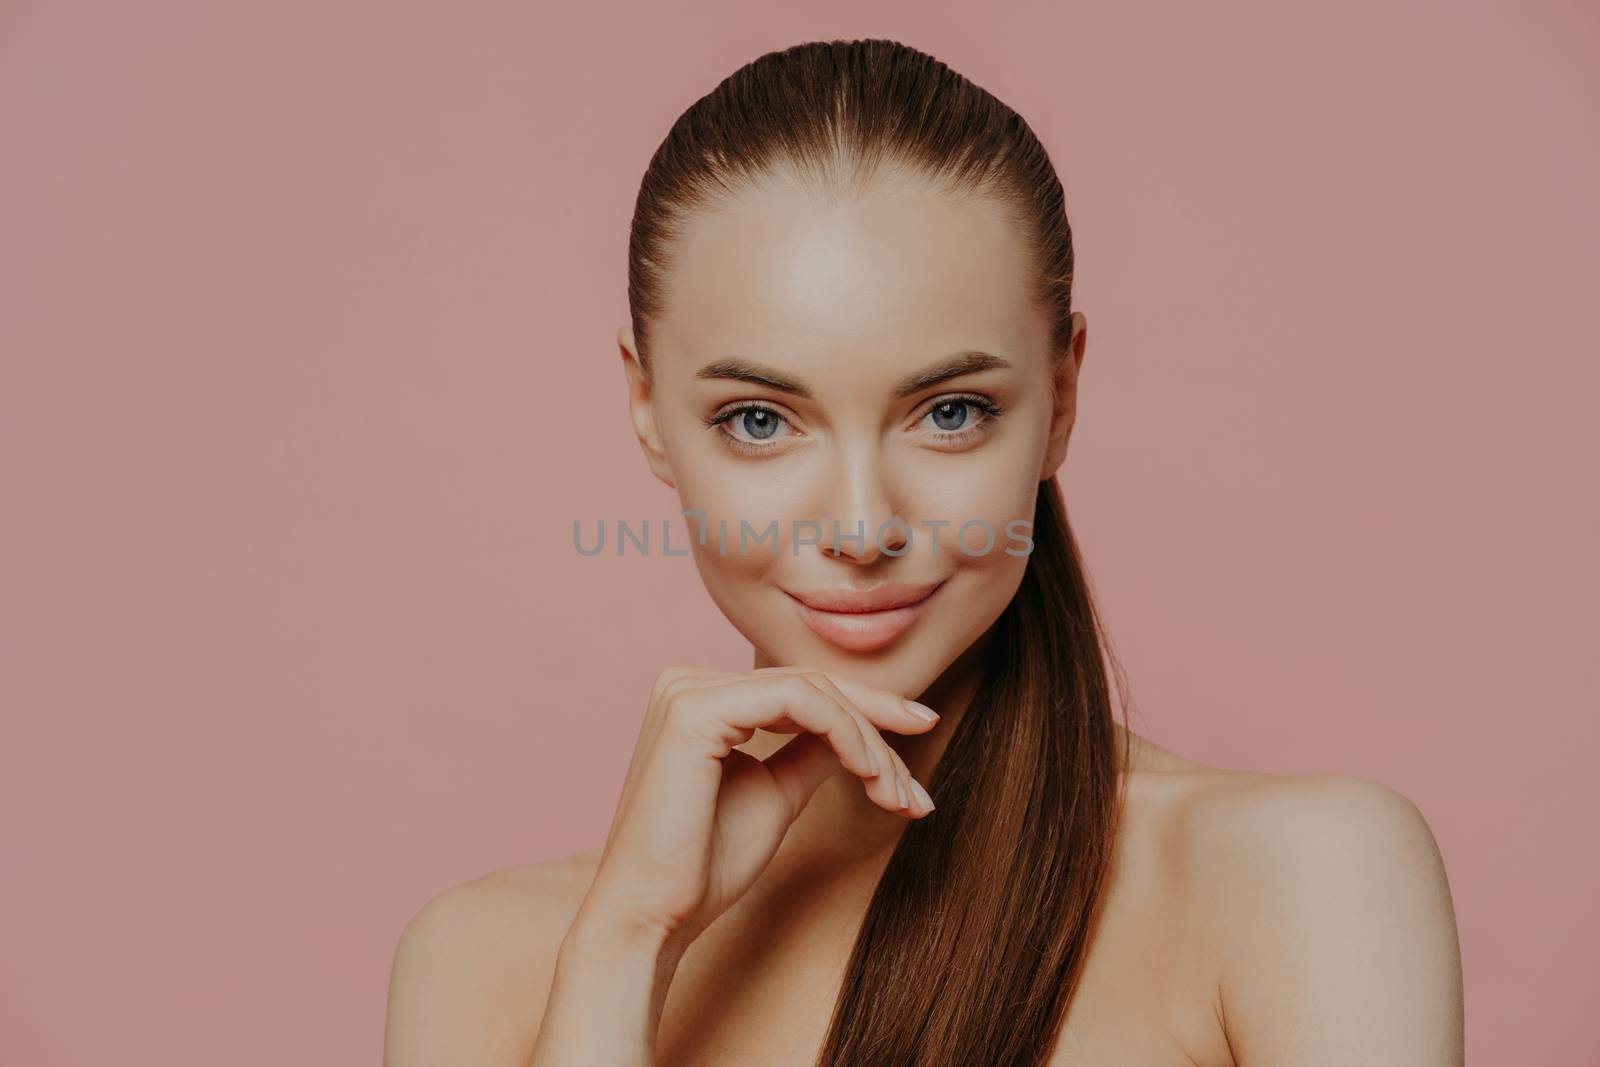 Skin care and anti aging procedures. Confident brunette young woman keeps hand under chin, has combed hair, clean fresh skin, enjoys beauty treatments, poses with naked body over pink background by vkstock